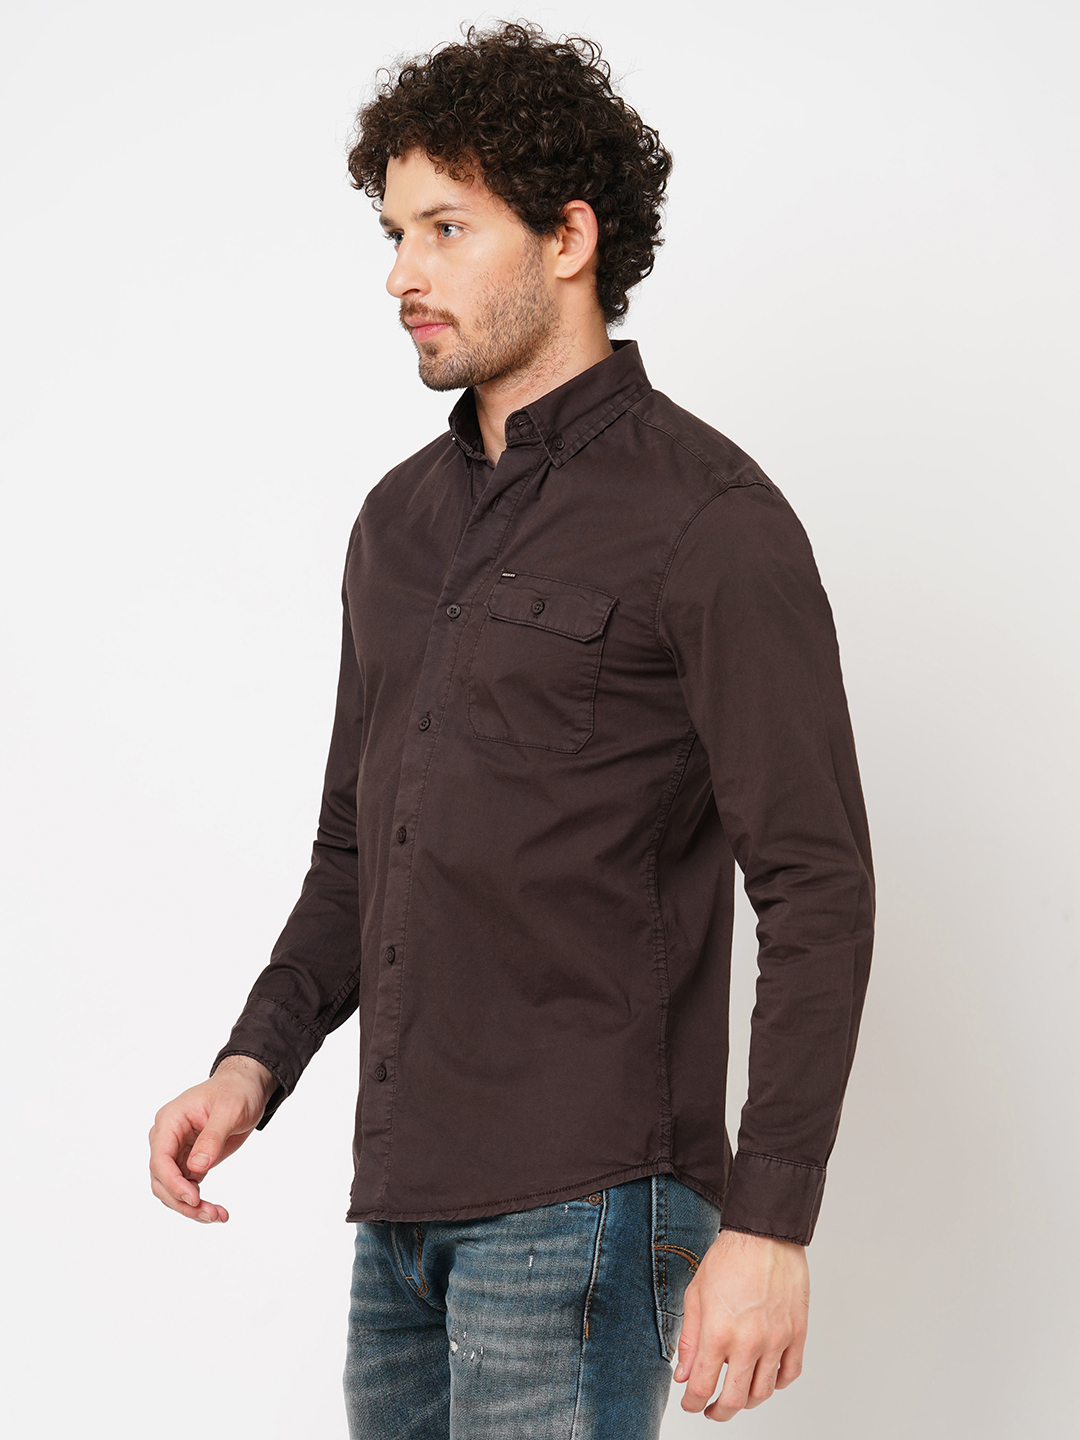 BROWN FULL SLEEVE SOLID SHIRT (LEO F/SLV FIT)